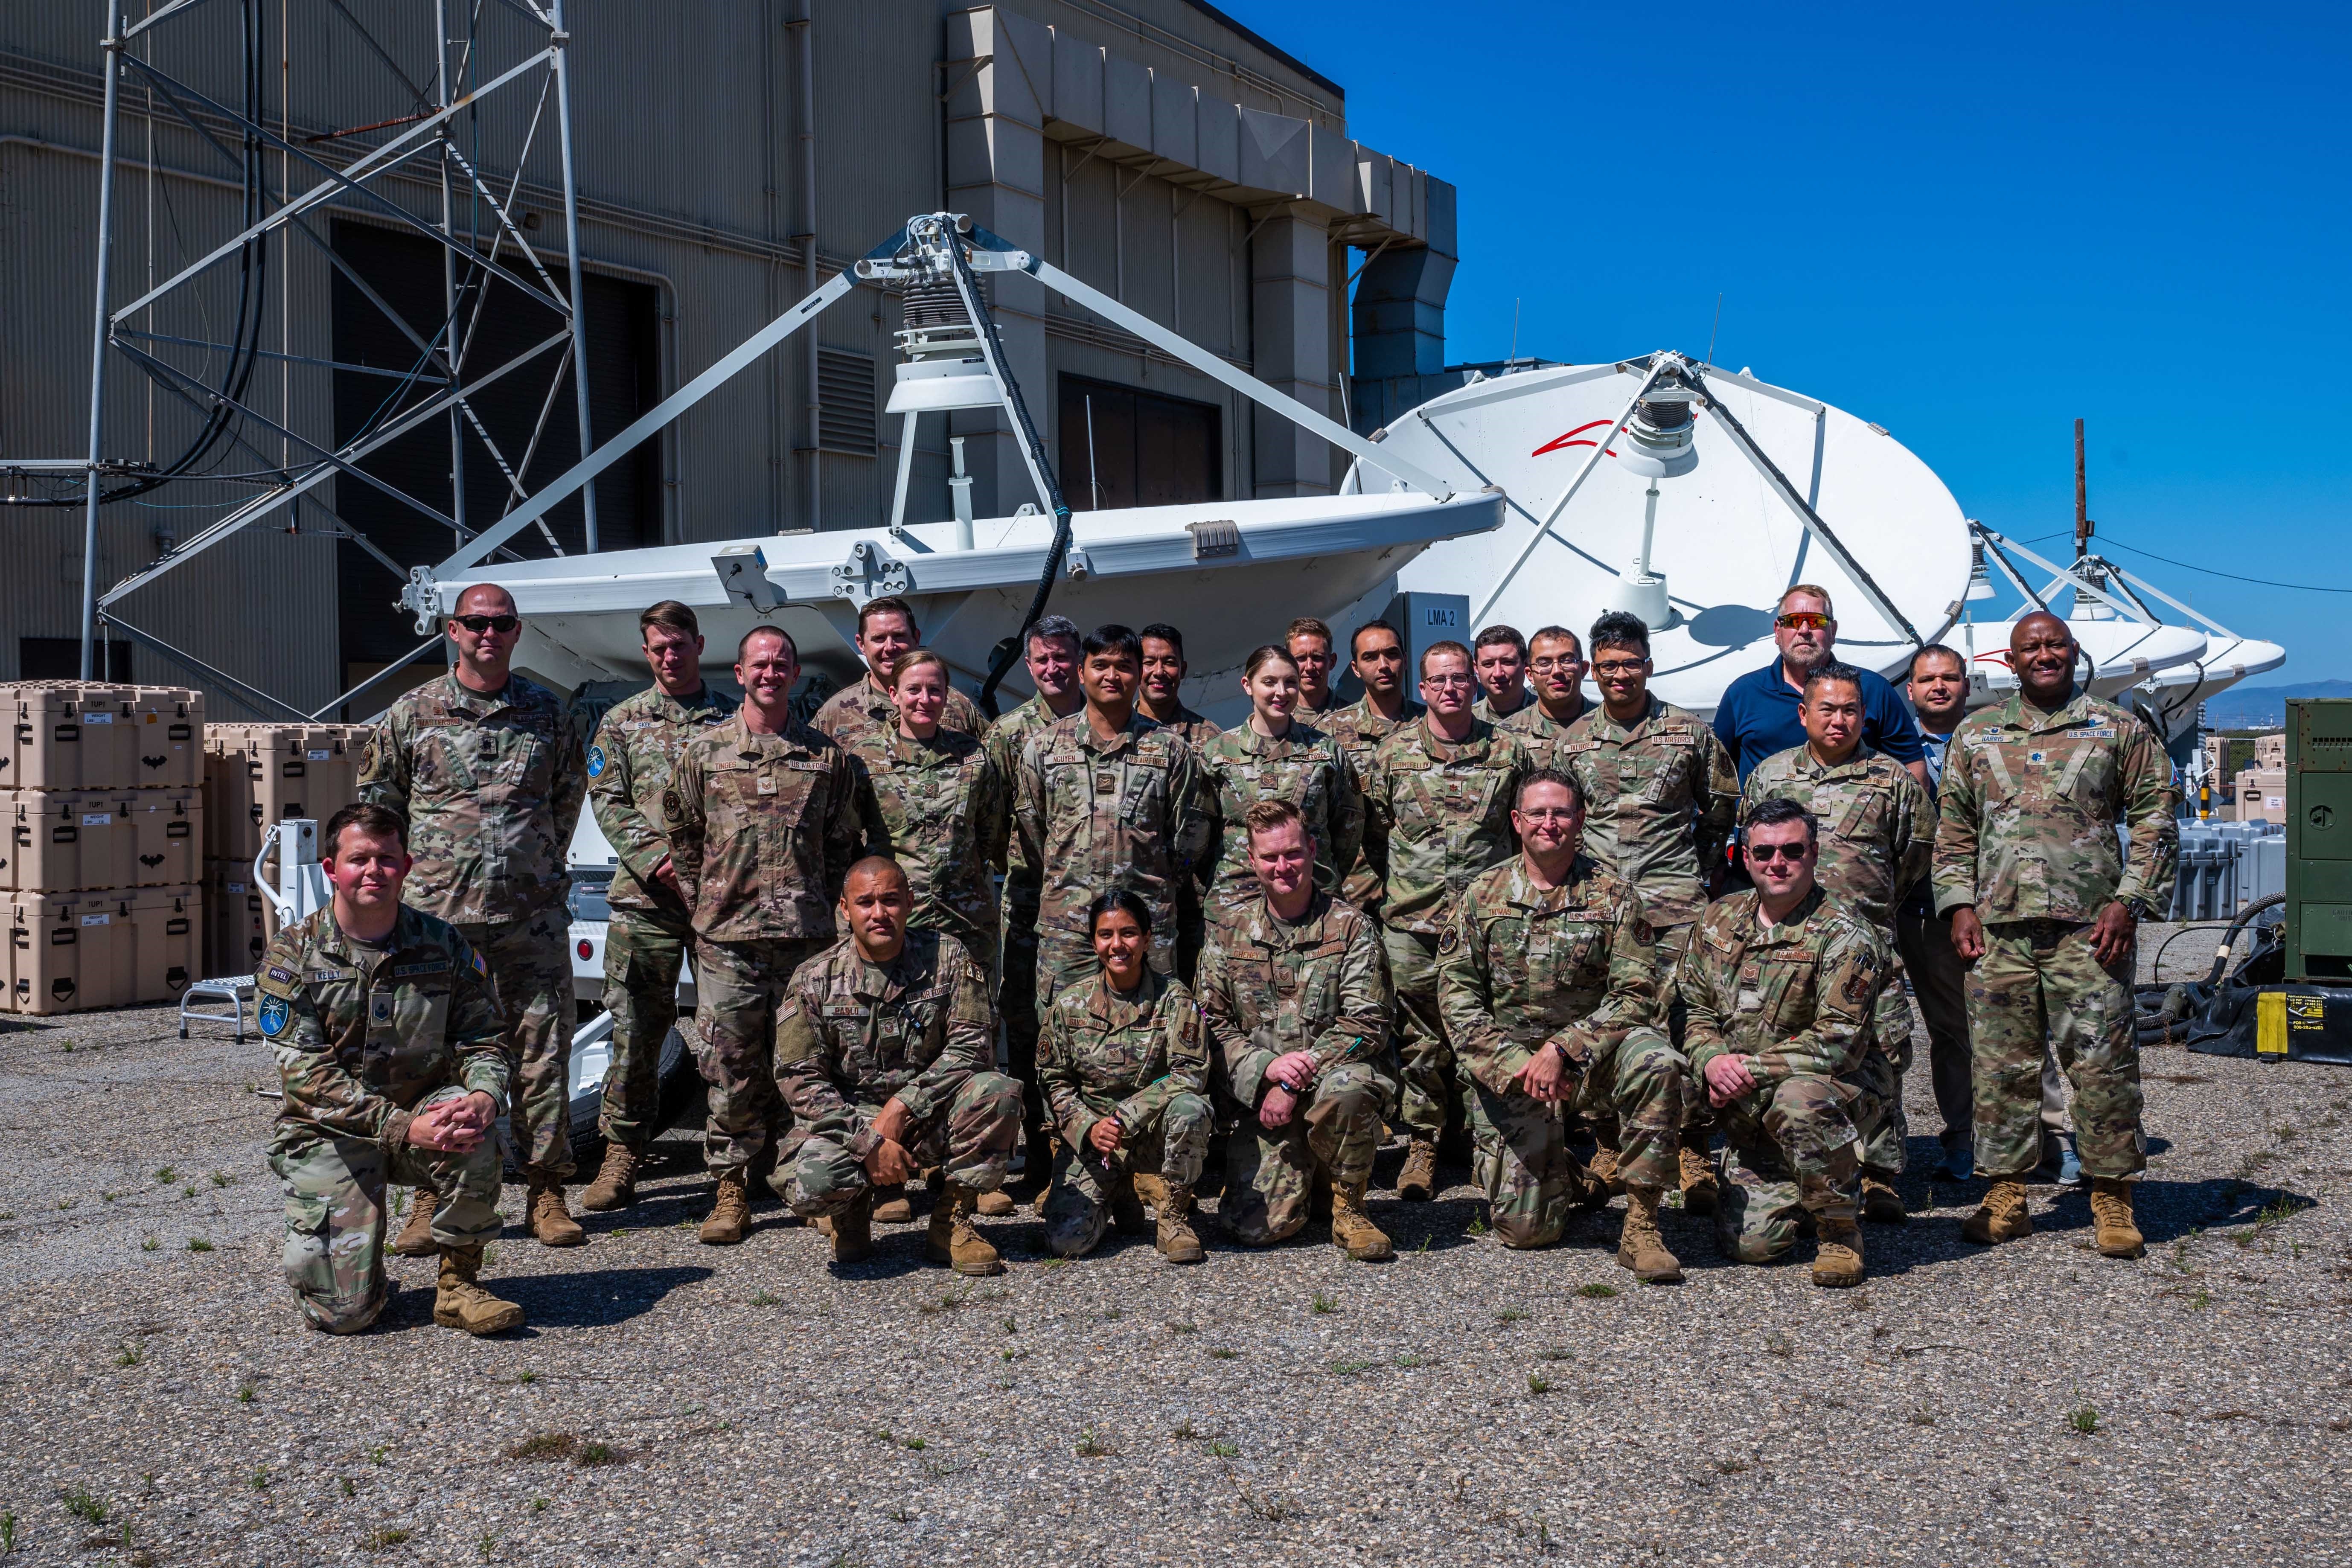 STARCOM debuts new combat readiness exercise in BLACK SKIES 22